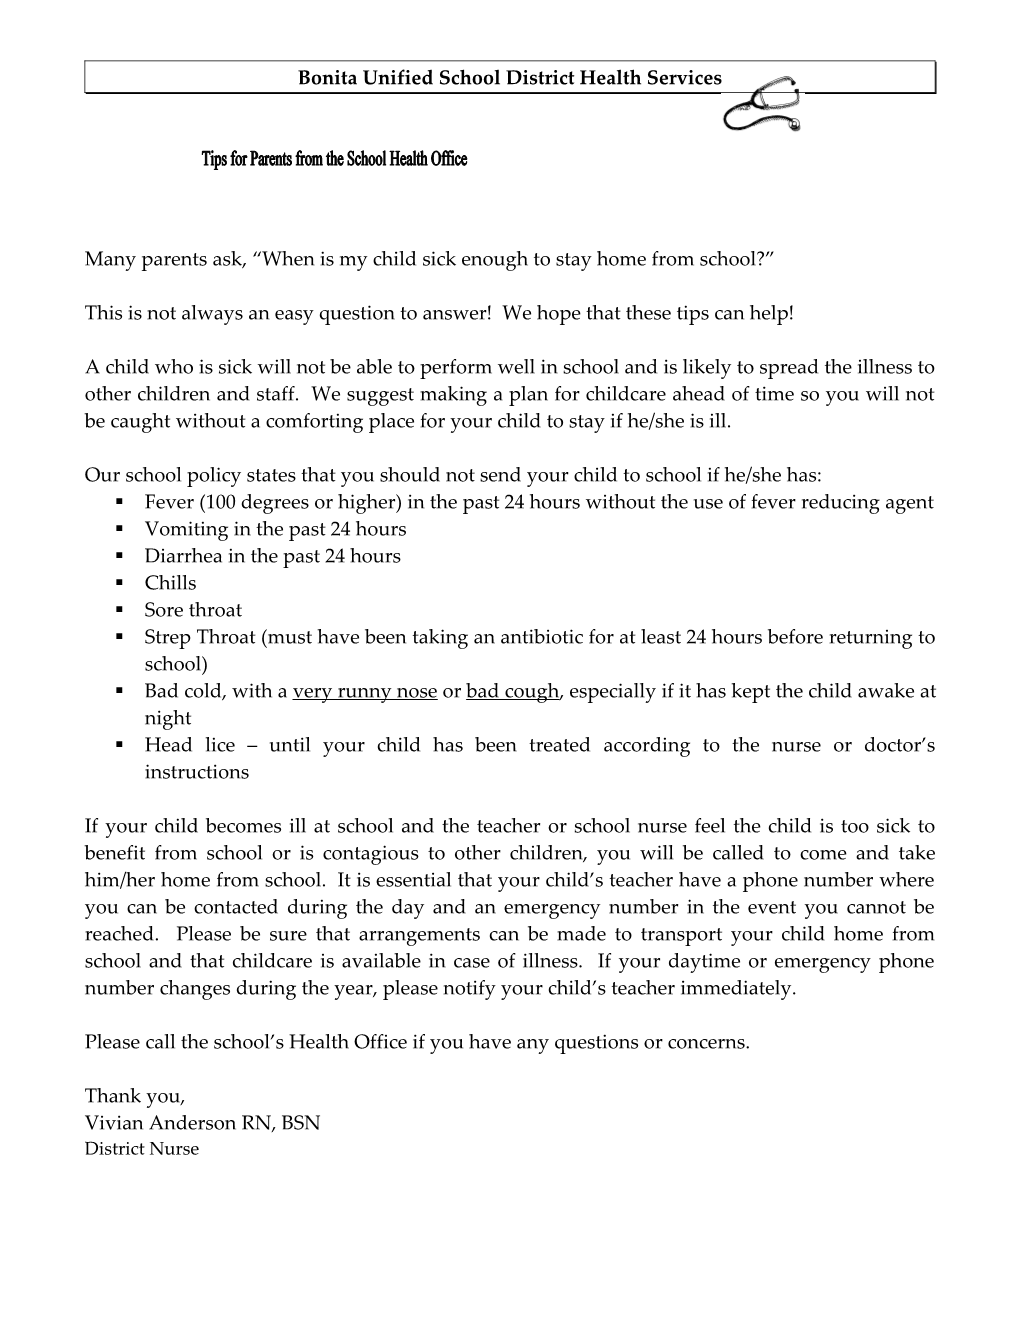 Letter to Parents Regarding Children Who Are Sick at School/When to Keep Your Child Home